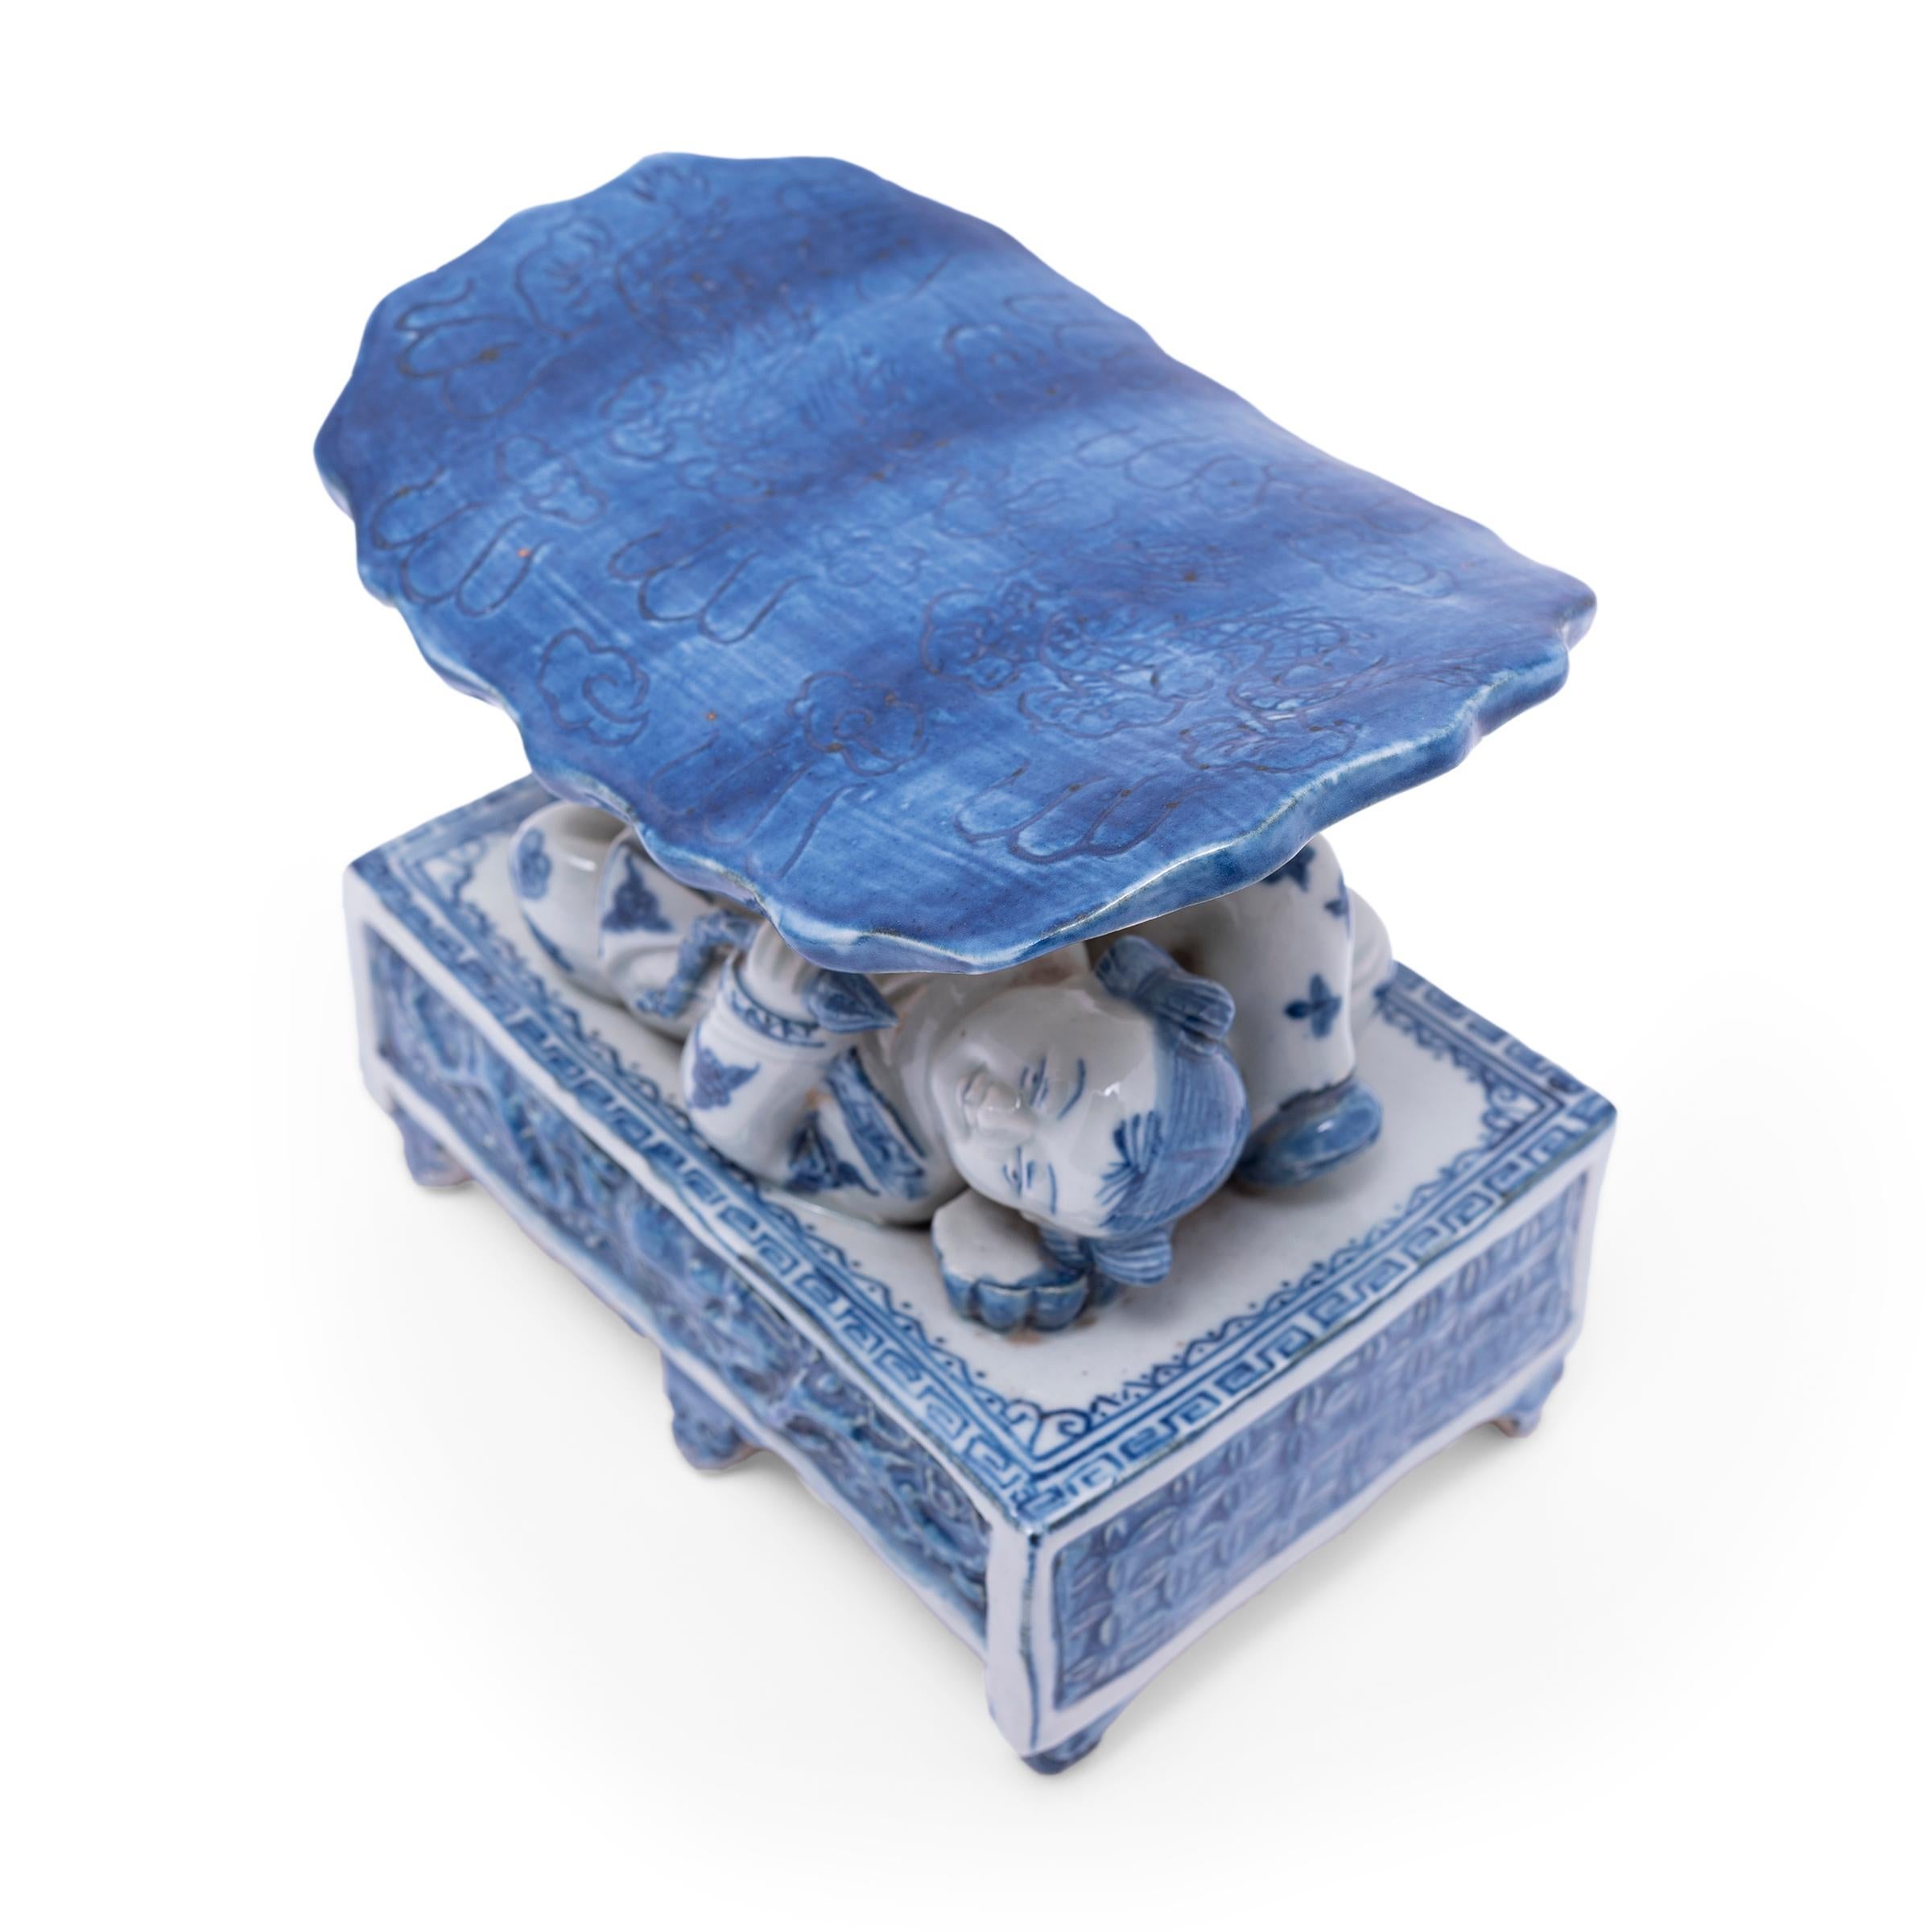 20th Century Chinese Blue and White Lotus Headrest, c. 1900